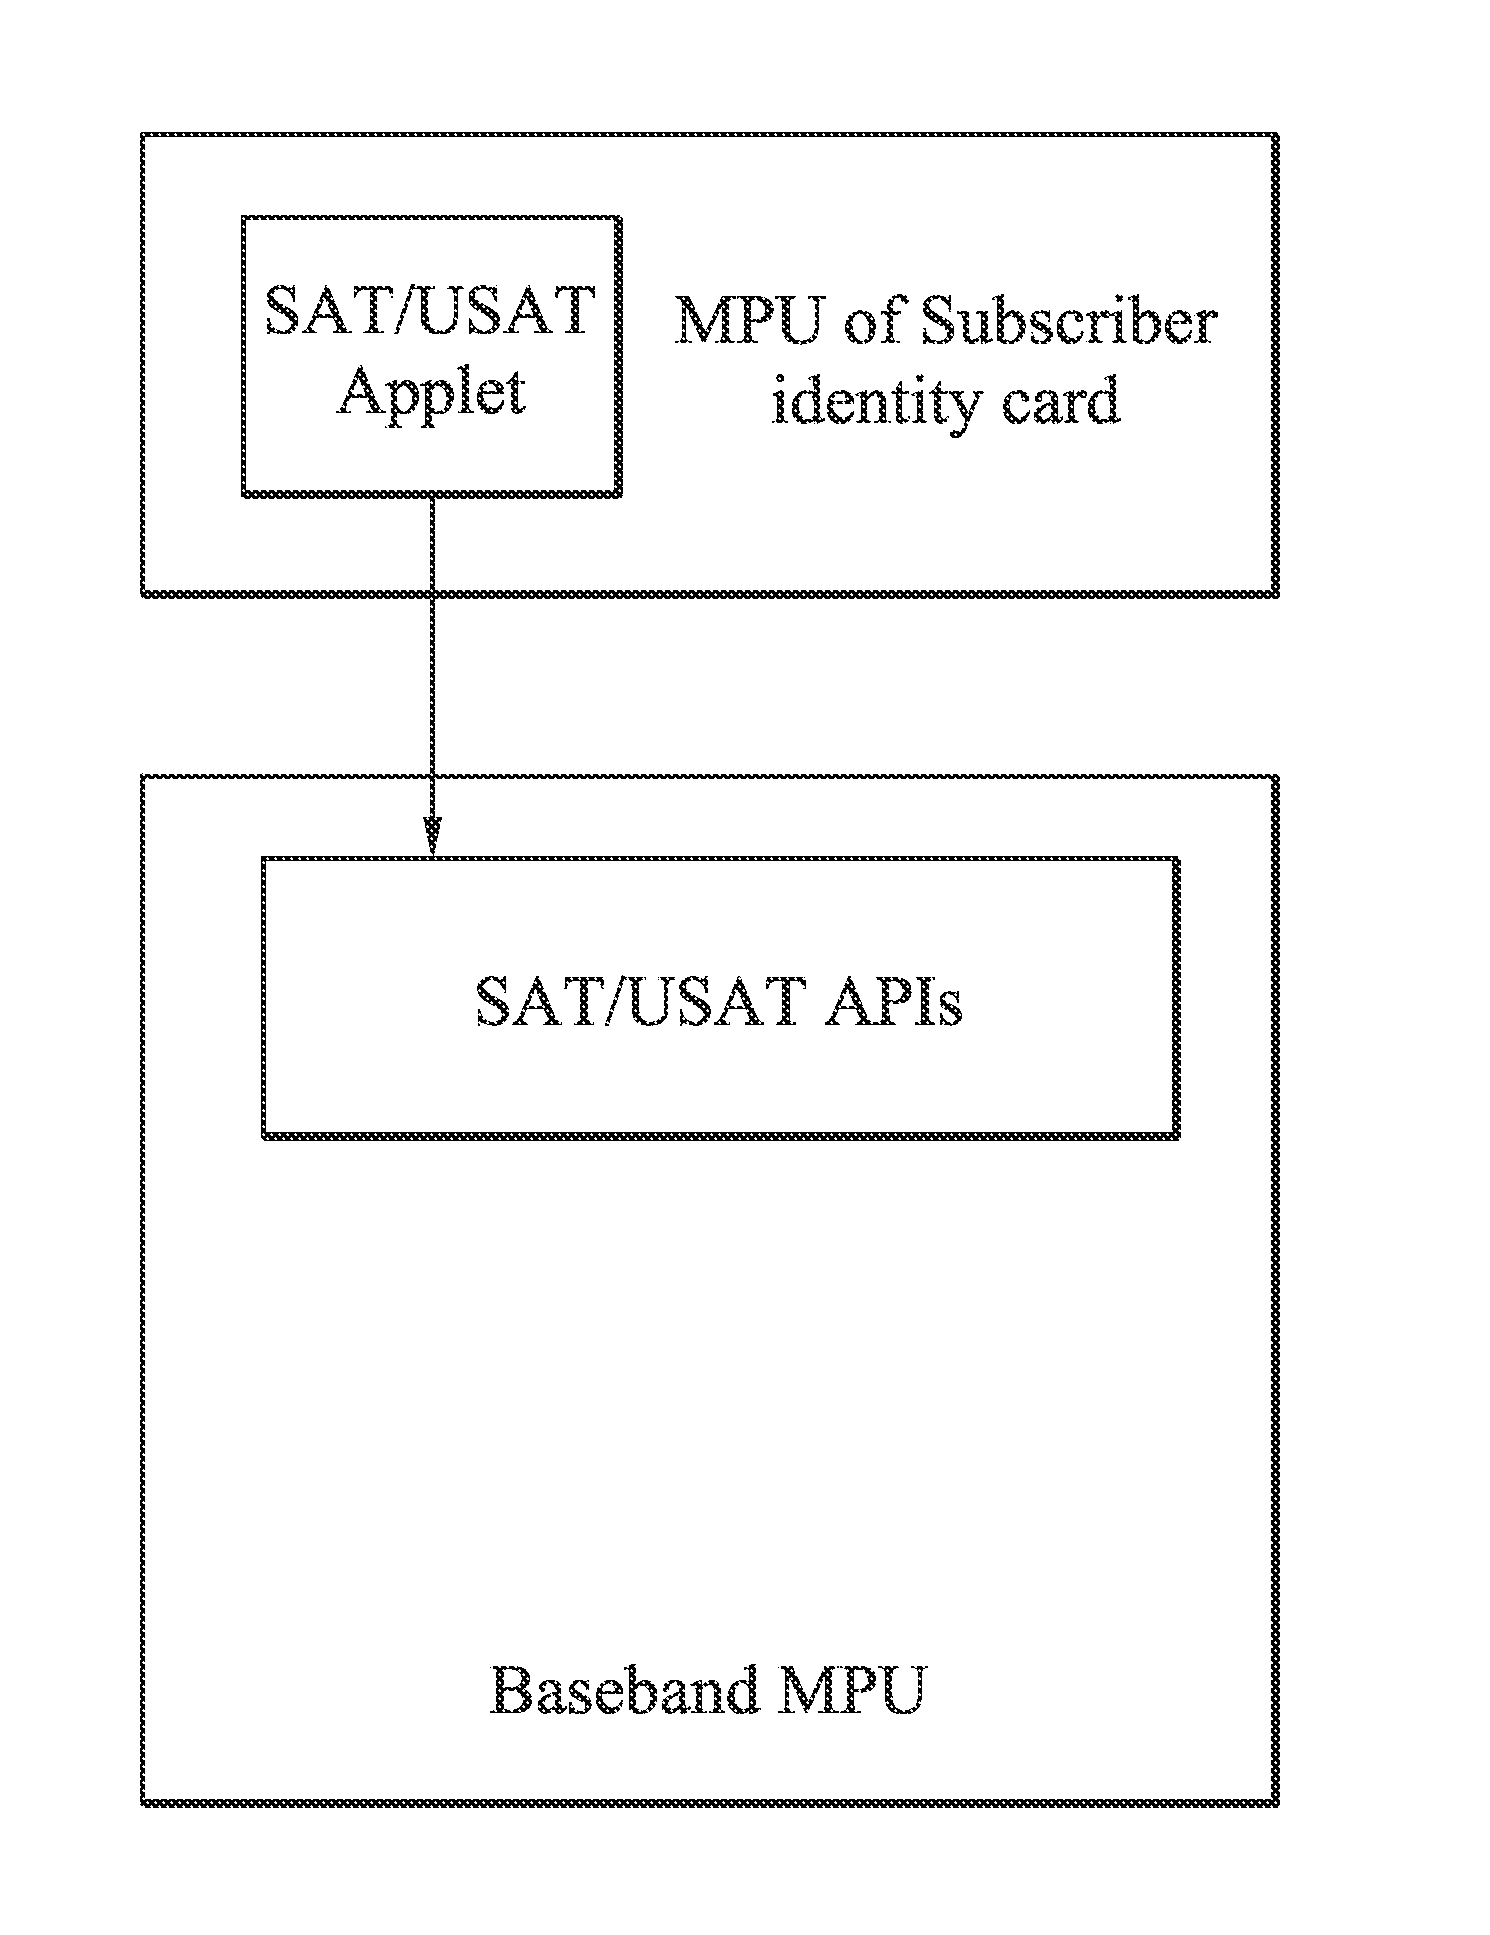 Apparatuses and methods for providing multi-standby mode of wireless communications using single subscriber identity card with multiple subscriber numbers